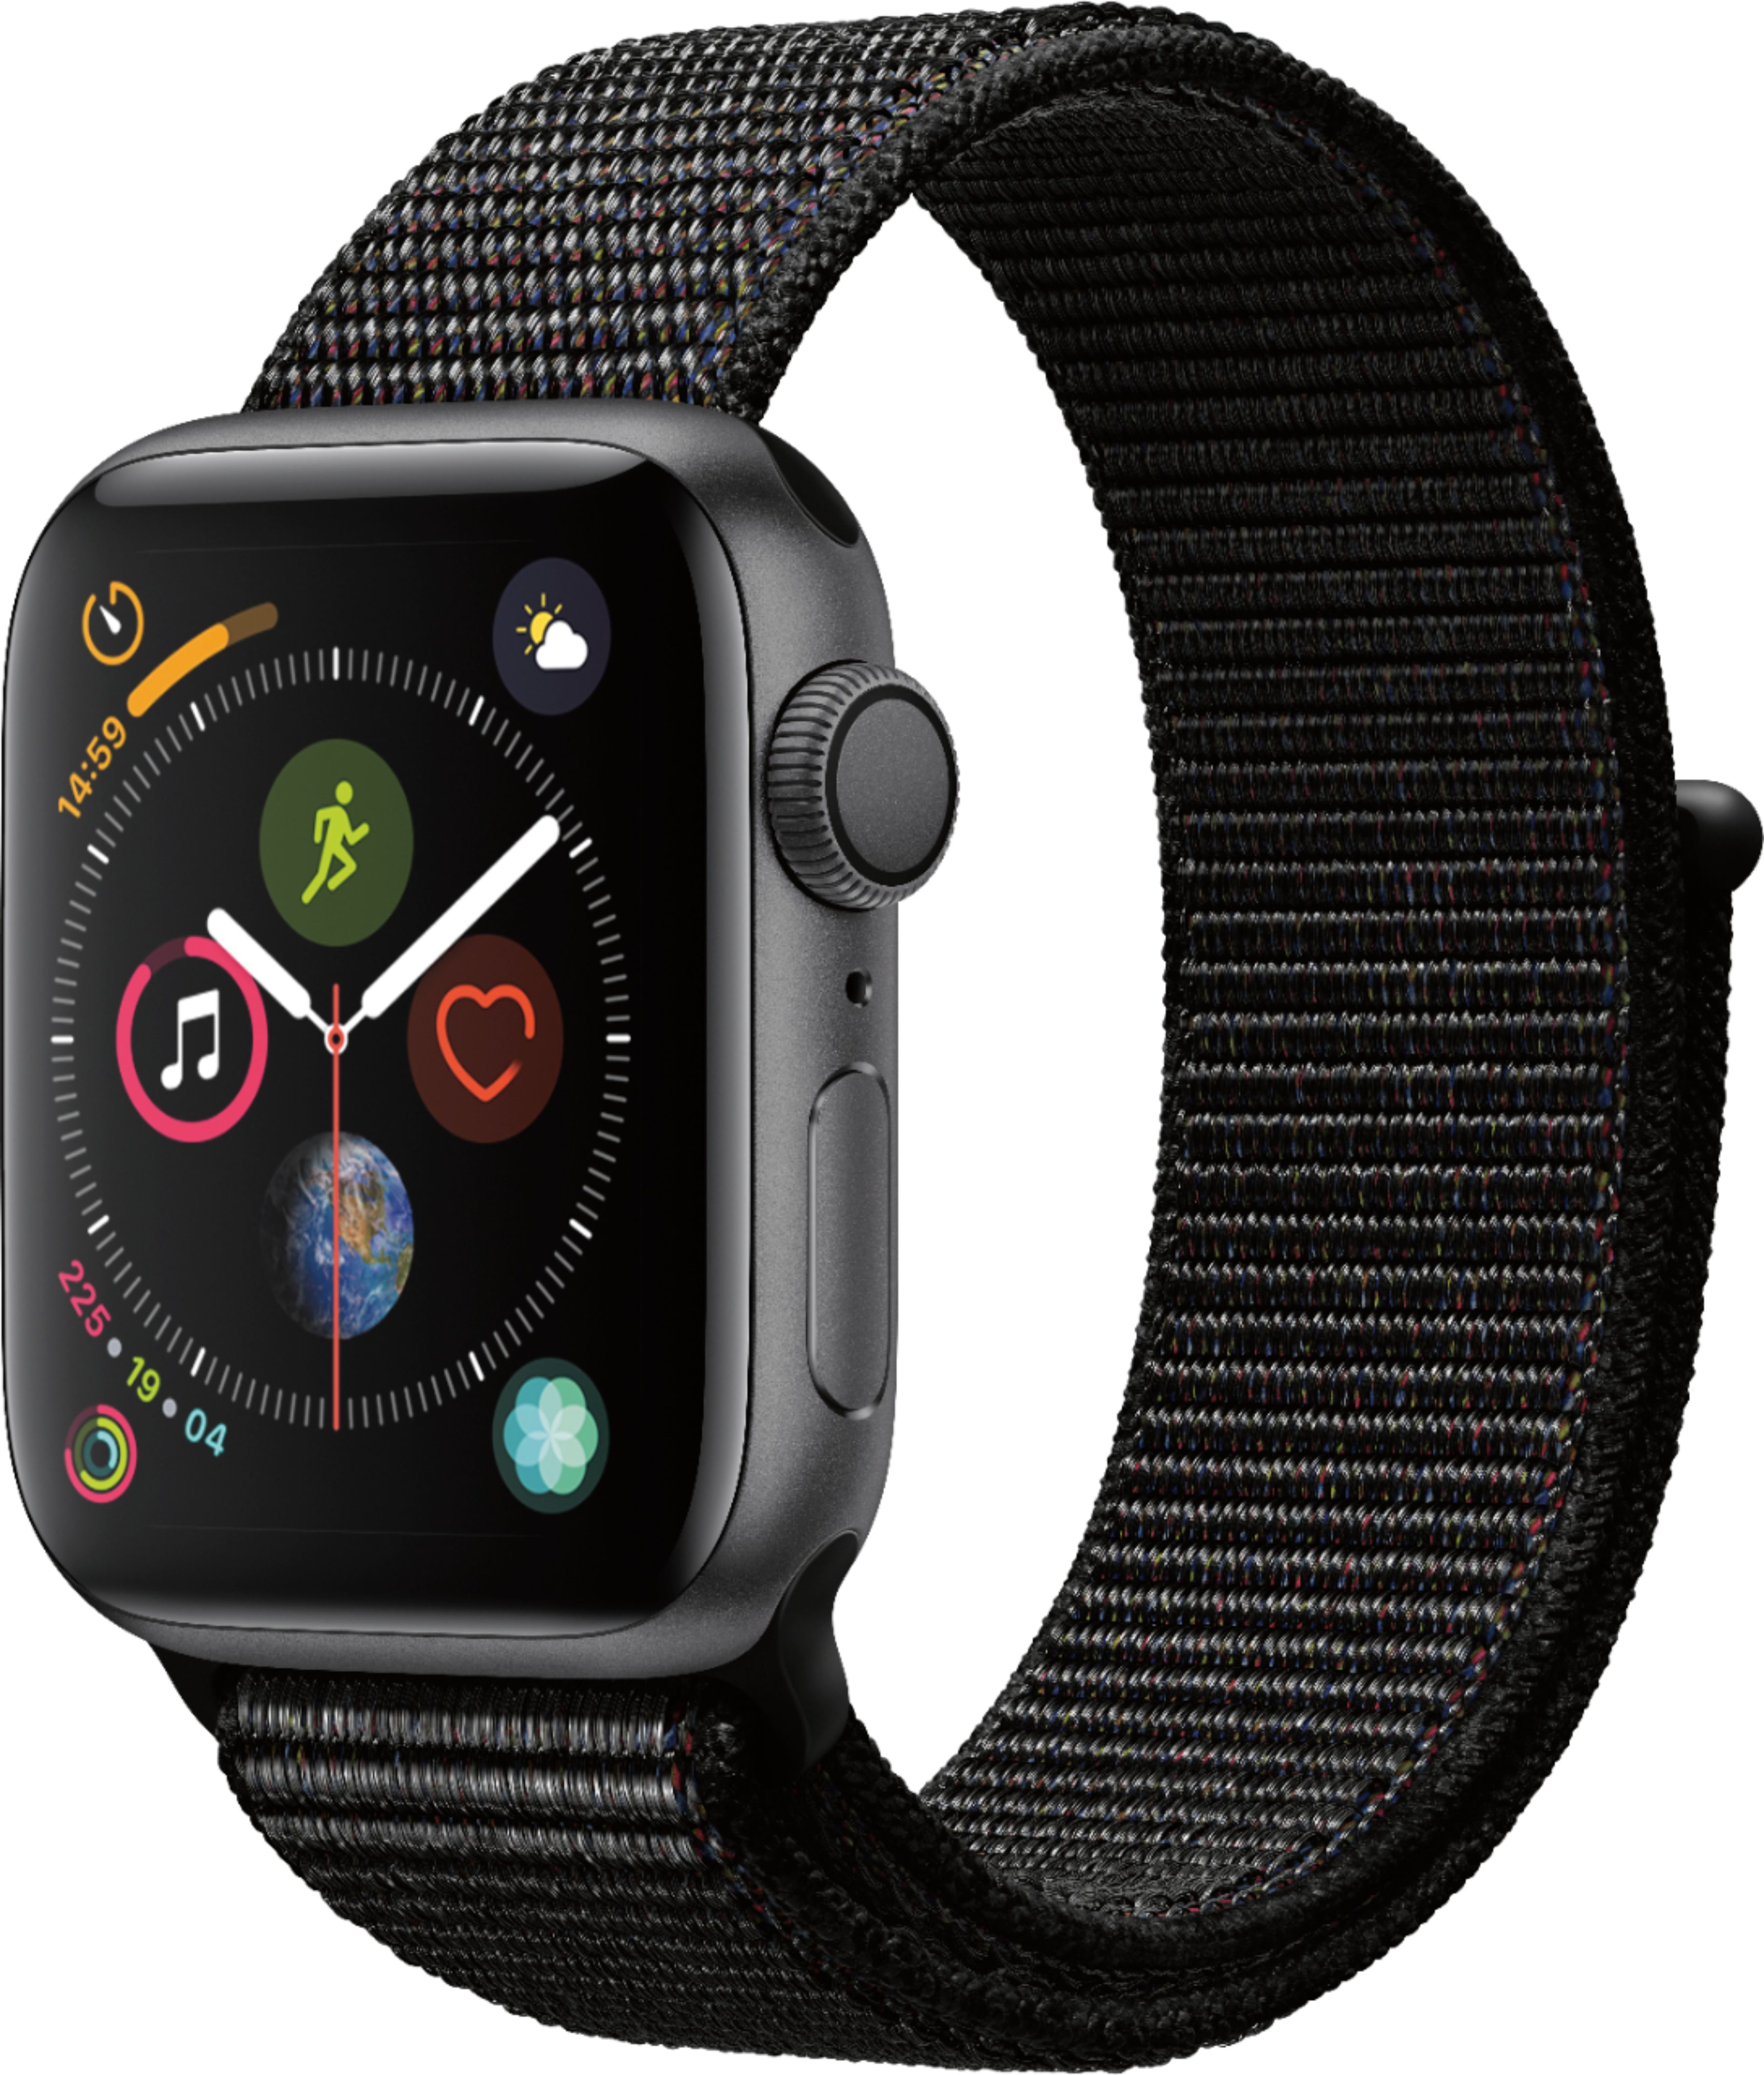 Apple Watch Series 4 (GPS) 40mm Space Gray Aluminum Case with Black Sport Loop - Space Gray Aluminum was $349.0 now $244.99 (30.0% off)